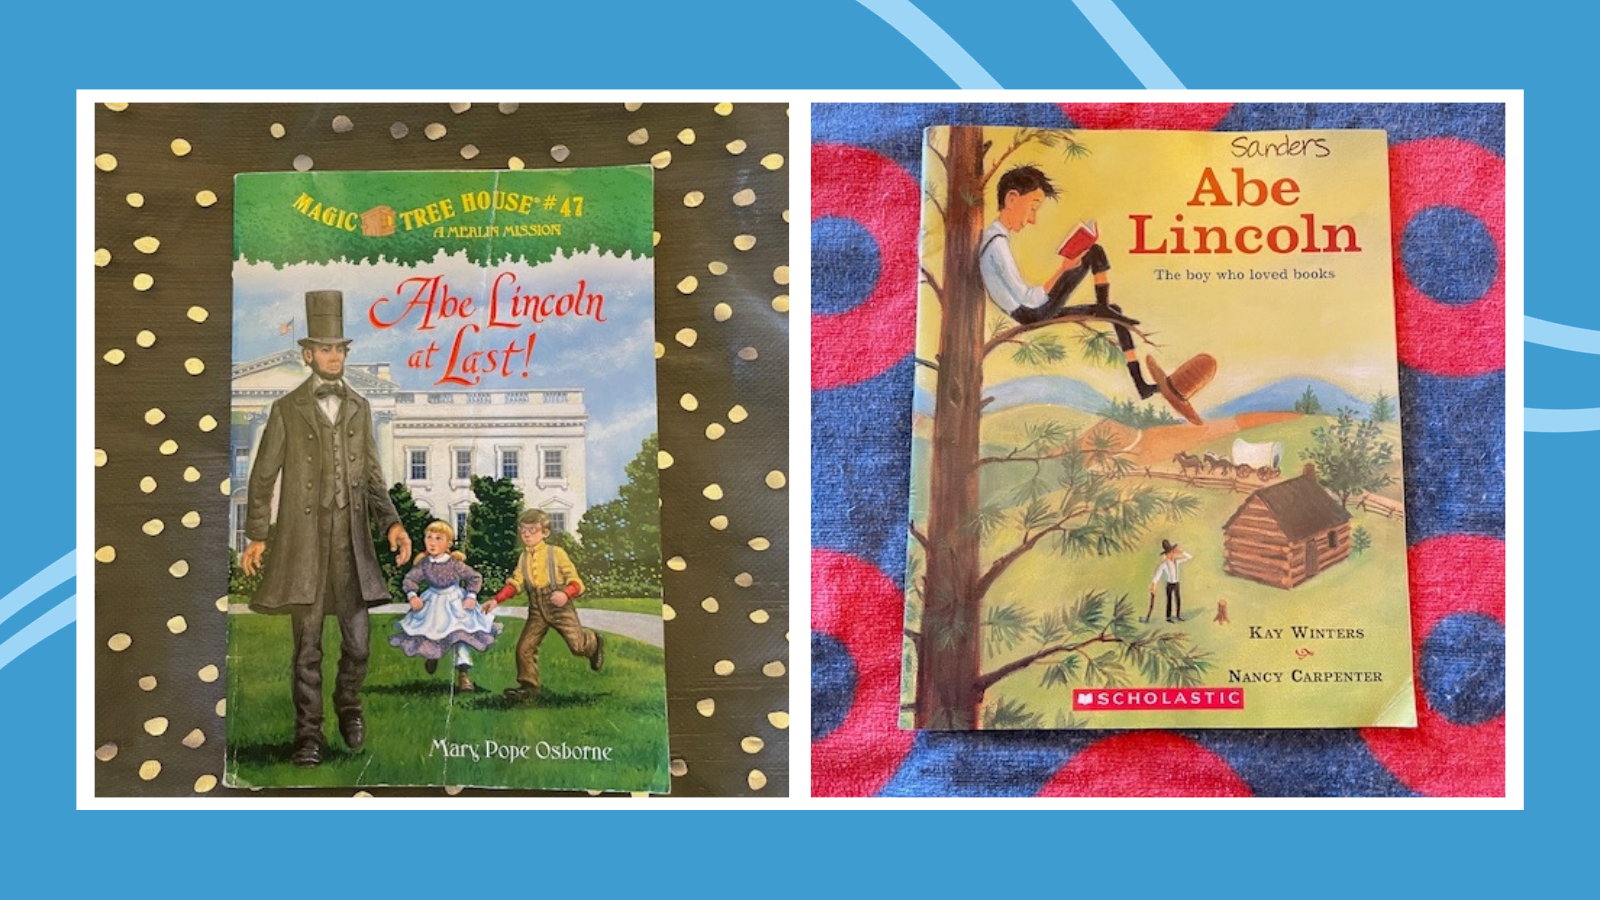 Examples of two Abraham Lincoln books on colorful backgrounds.